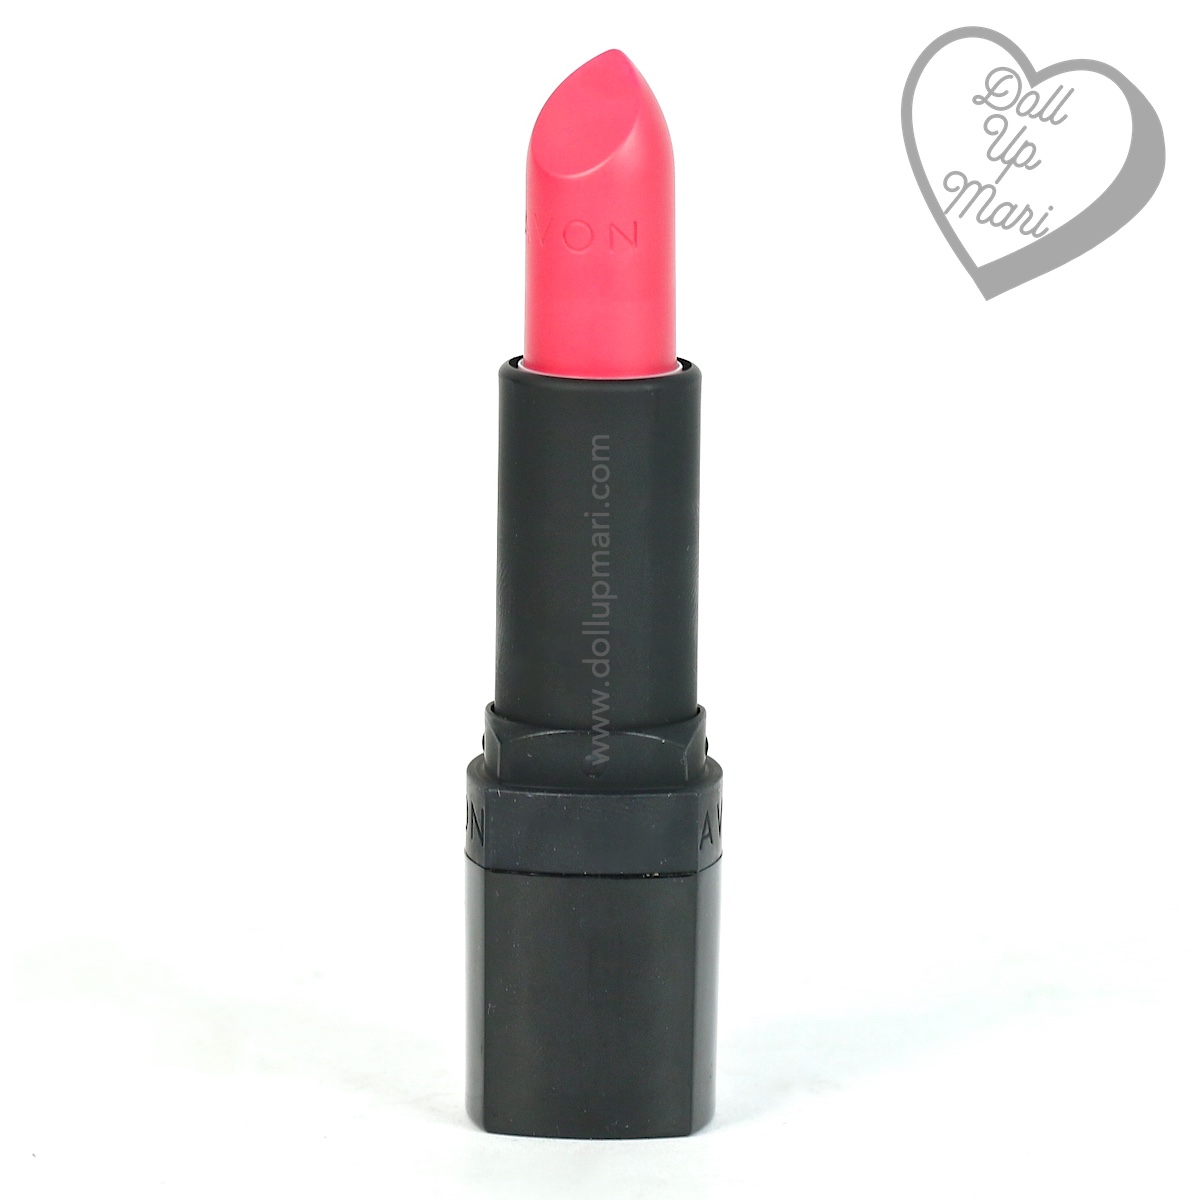 Pack shot of Vibrant Melon shade of AVON Perfectly Matte Lipstick